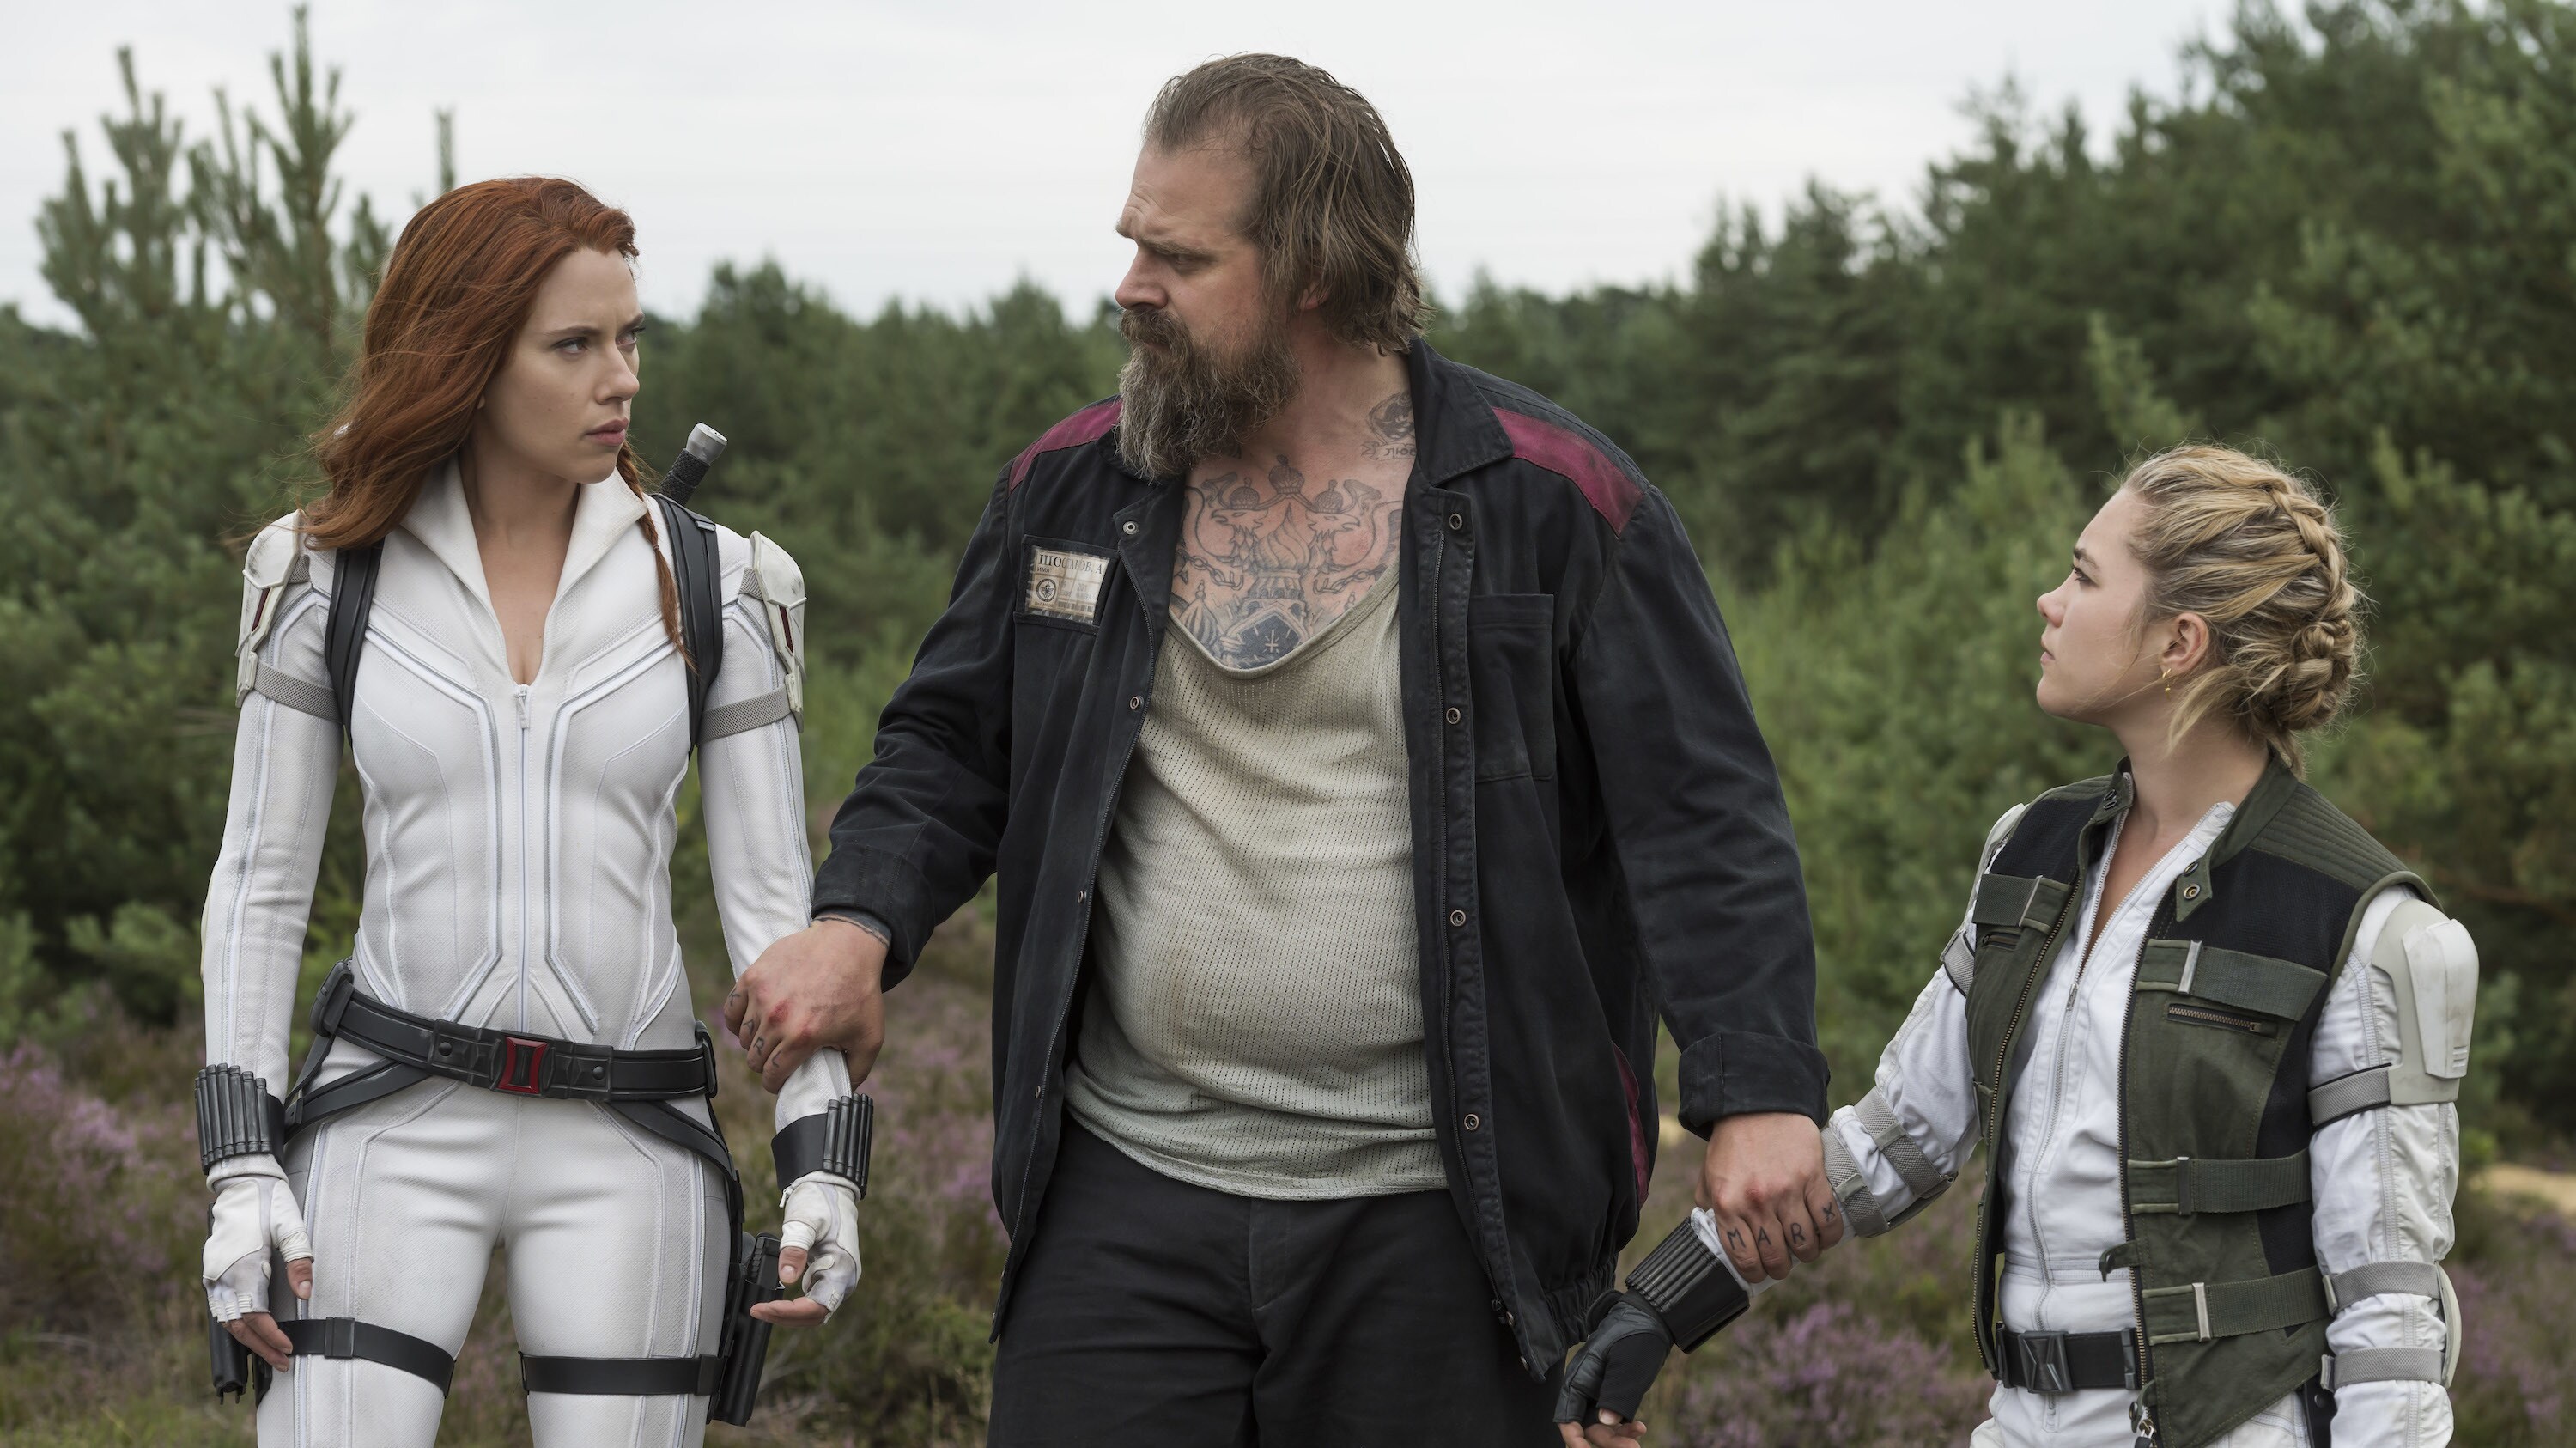 (L-R): Black Widow/Natasha Romanoff (Scarlett Johansson), Alexei (David Harbour) and Yelena (Florence Pugh) in Marvel Studios' BLACK WIDOW, in theaters and on Disney+ with Premier Access. Photo by Jay Maidment. ©Marvel Studios 2021. All Rights Reserved.